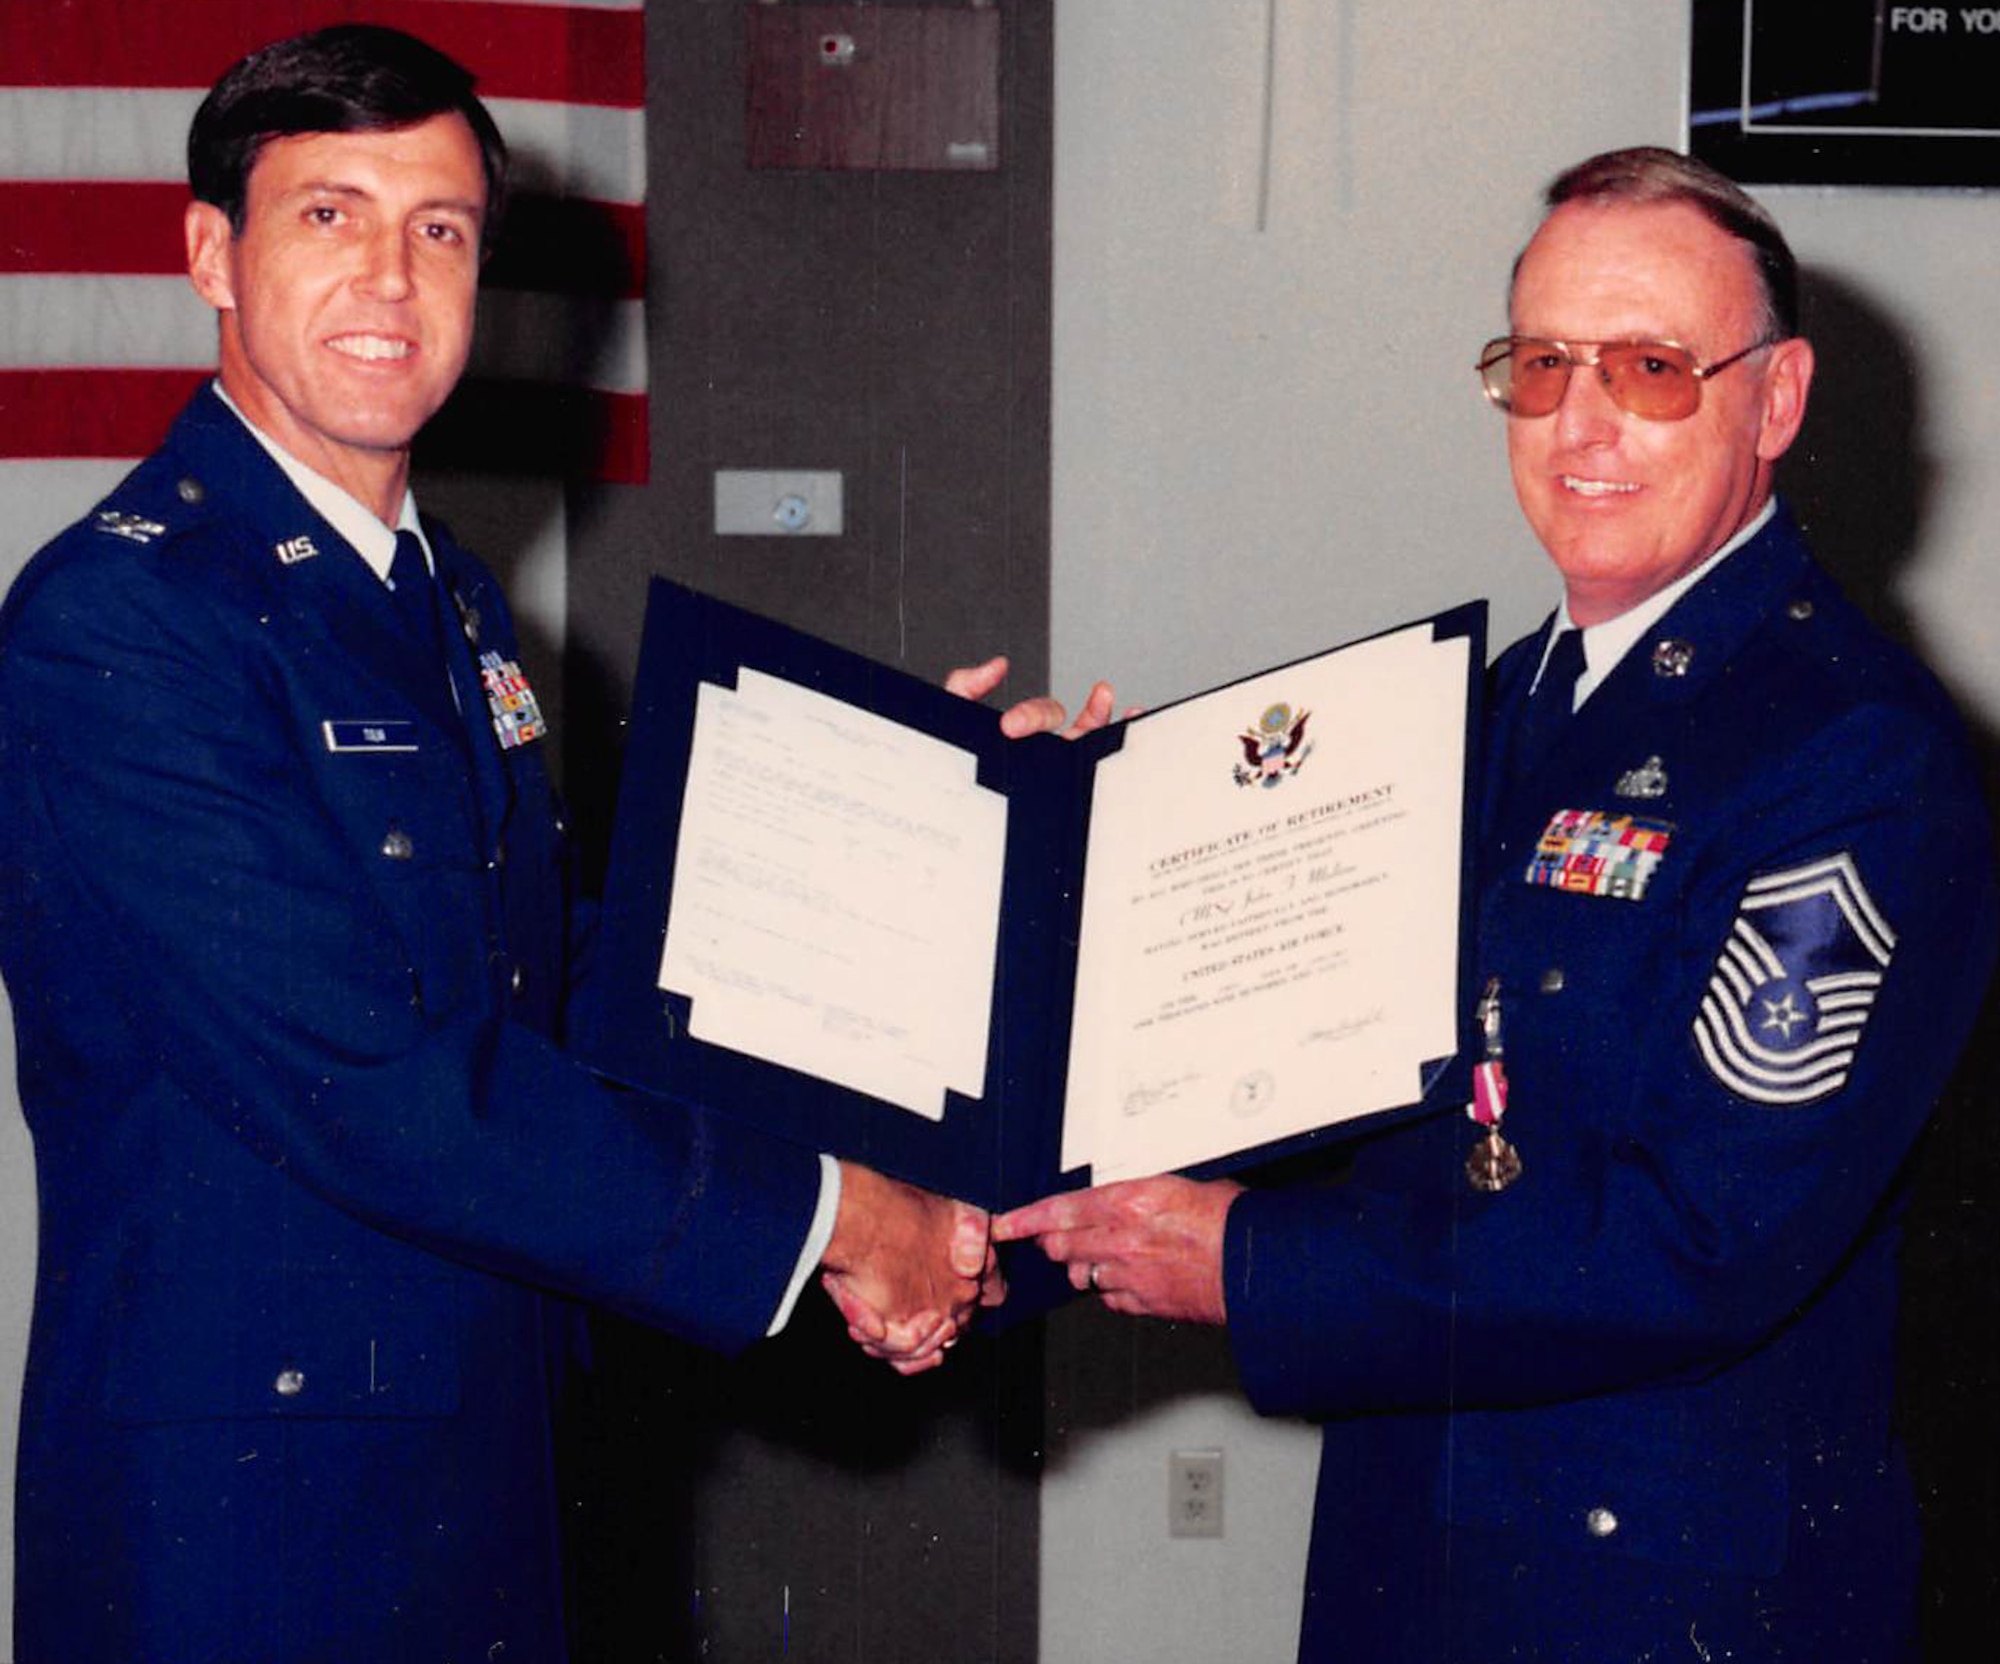 Chief Master Sgt. John Malone, right, retires after serving 26 years on active duty at a ceremony held on Nellis Air Force Base, Nev., in 1990. Malone served a combined 52 years on active duty and in civilian service. (Courtesy photo)